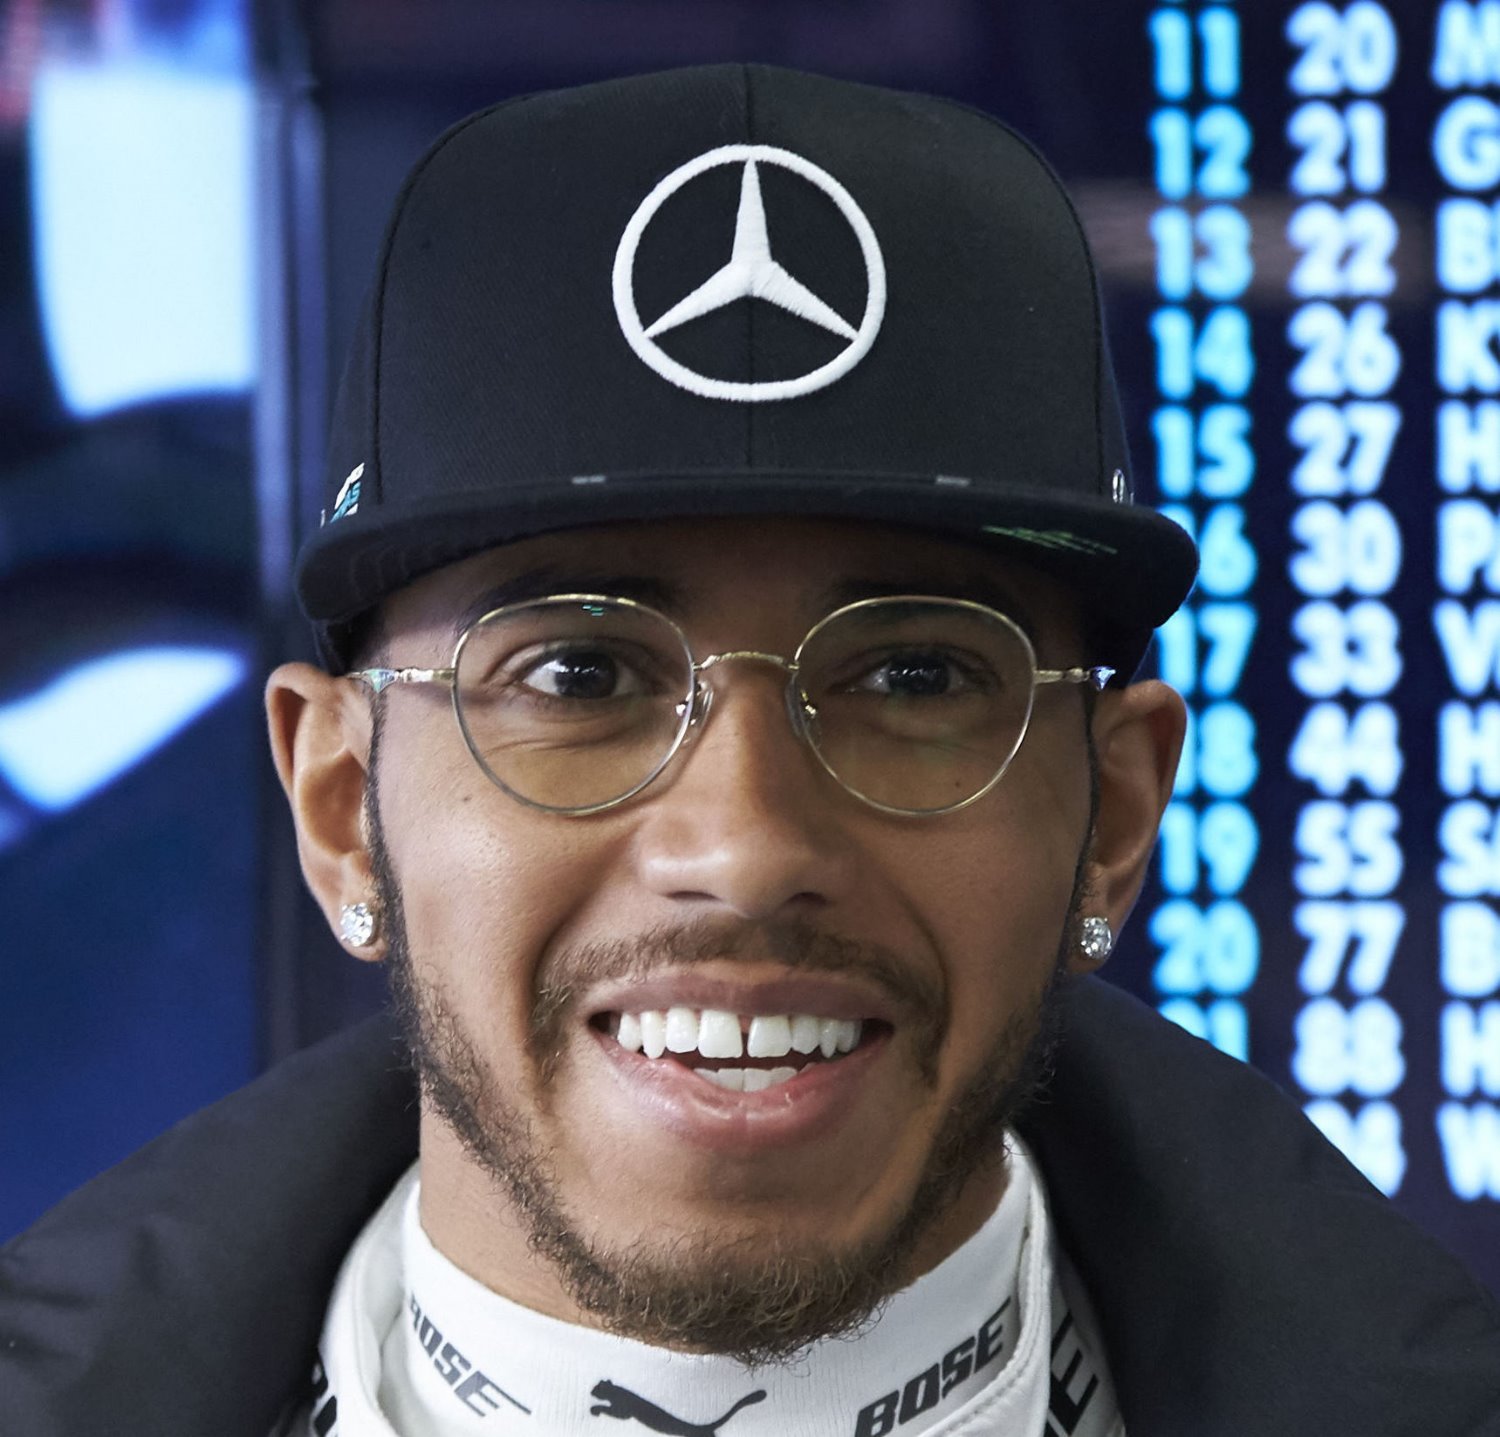 Hamilton must be smoking something. The Ferrari had brand new Ultra Soft tires on and it still could not pass the Mercedes that had tires that were two grades harder.